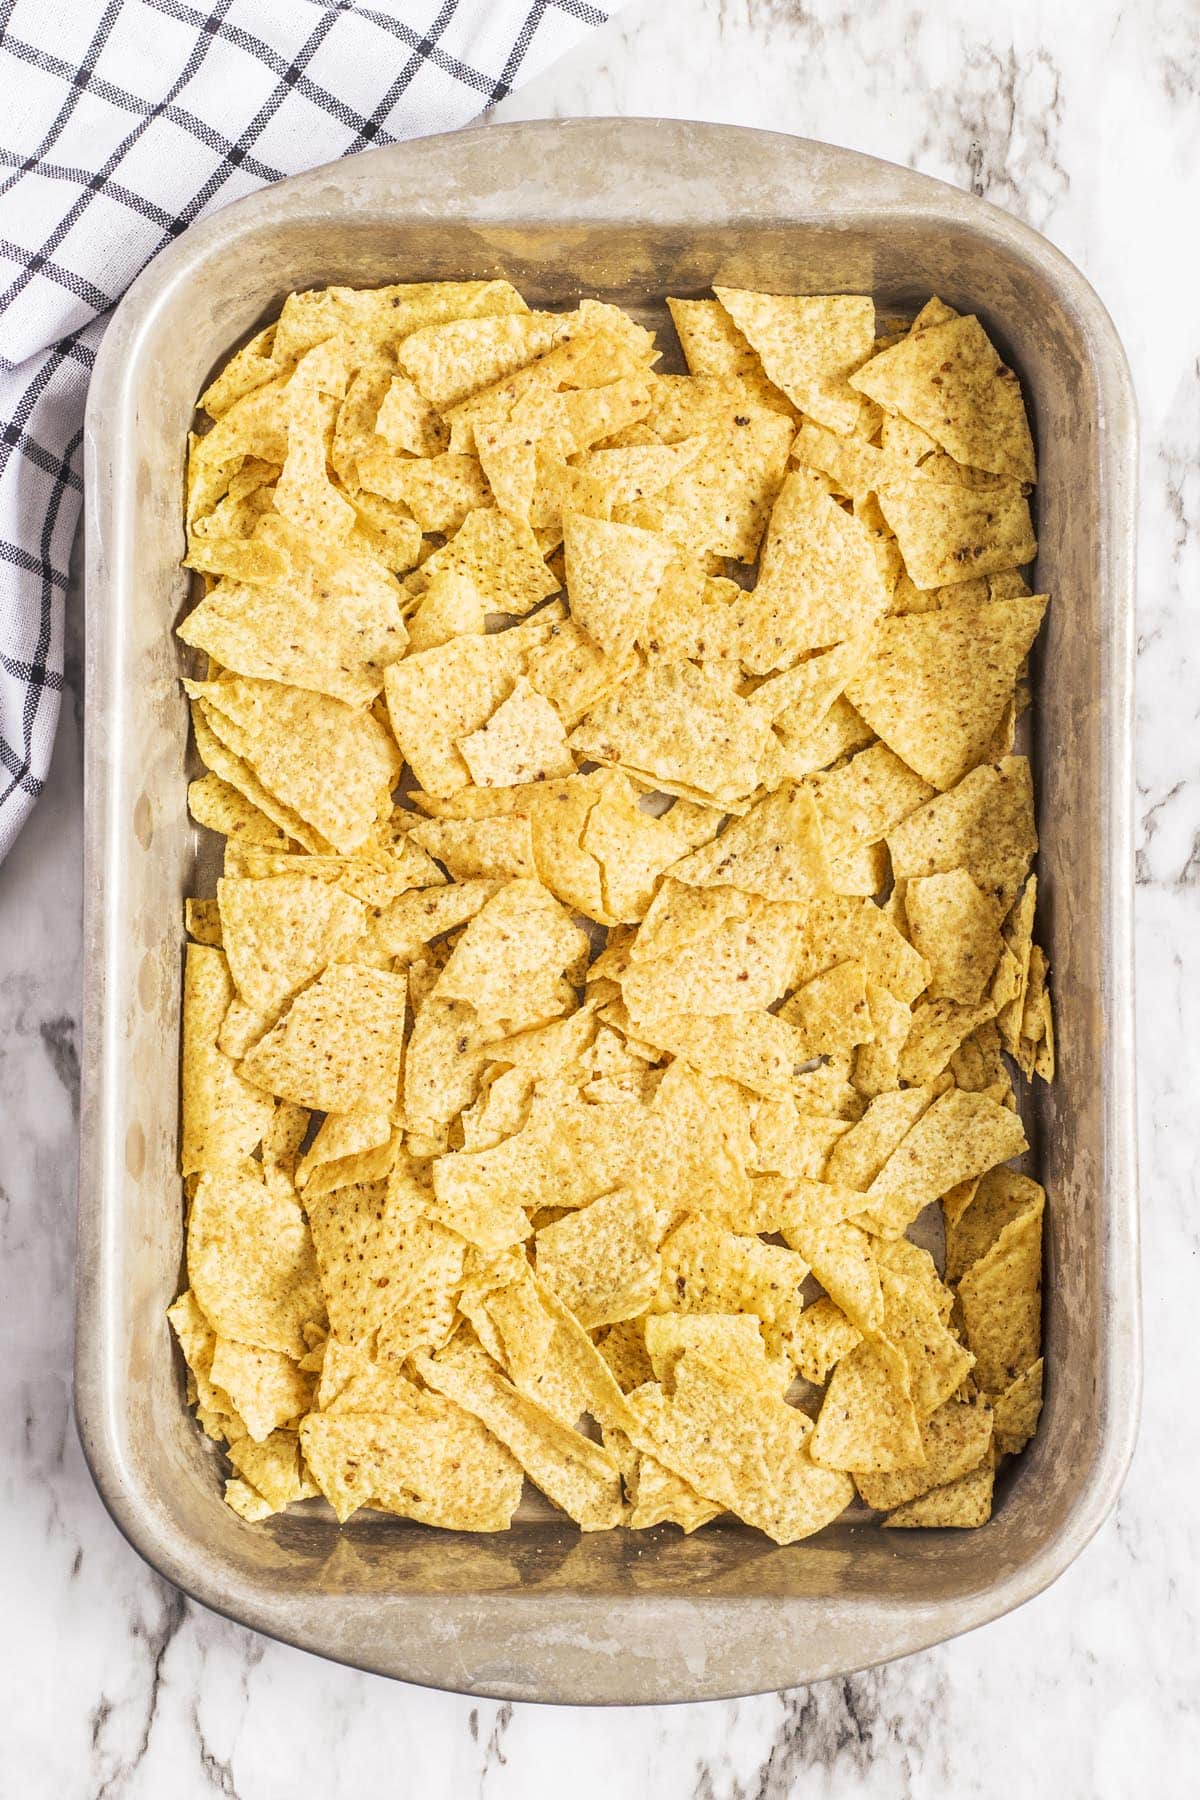 Fill the bottom of a prepared pan with corn chips